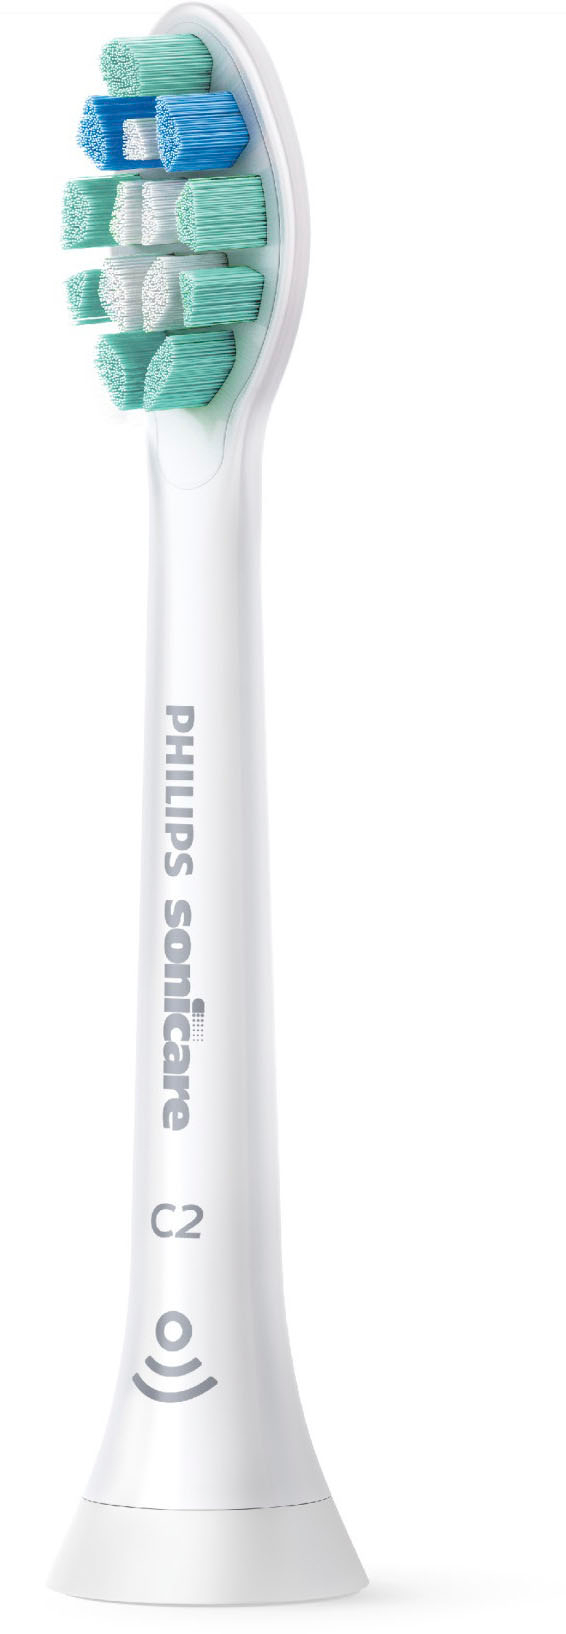 Left View: Philips Sonicare - DiamondClean Smart 9300 Rechargeable Toothbrush - White